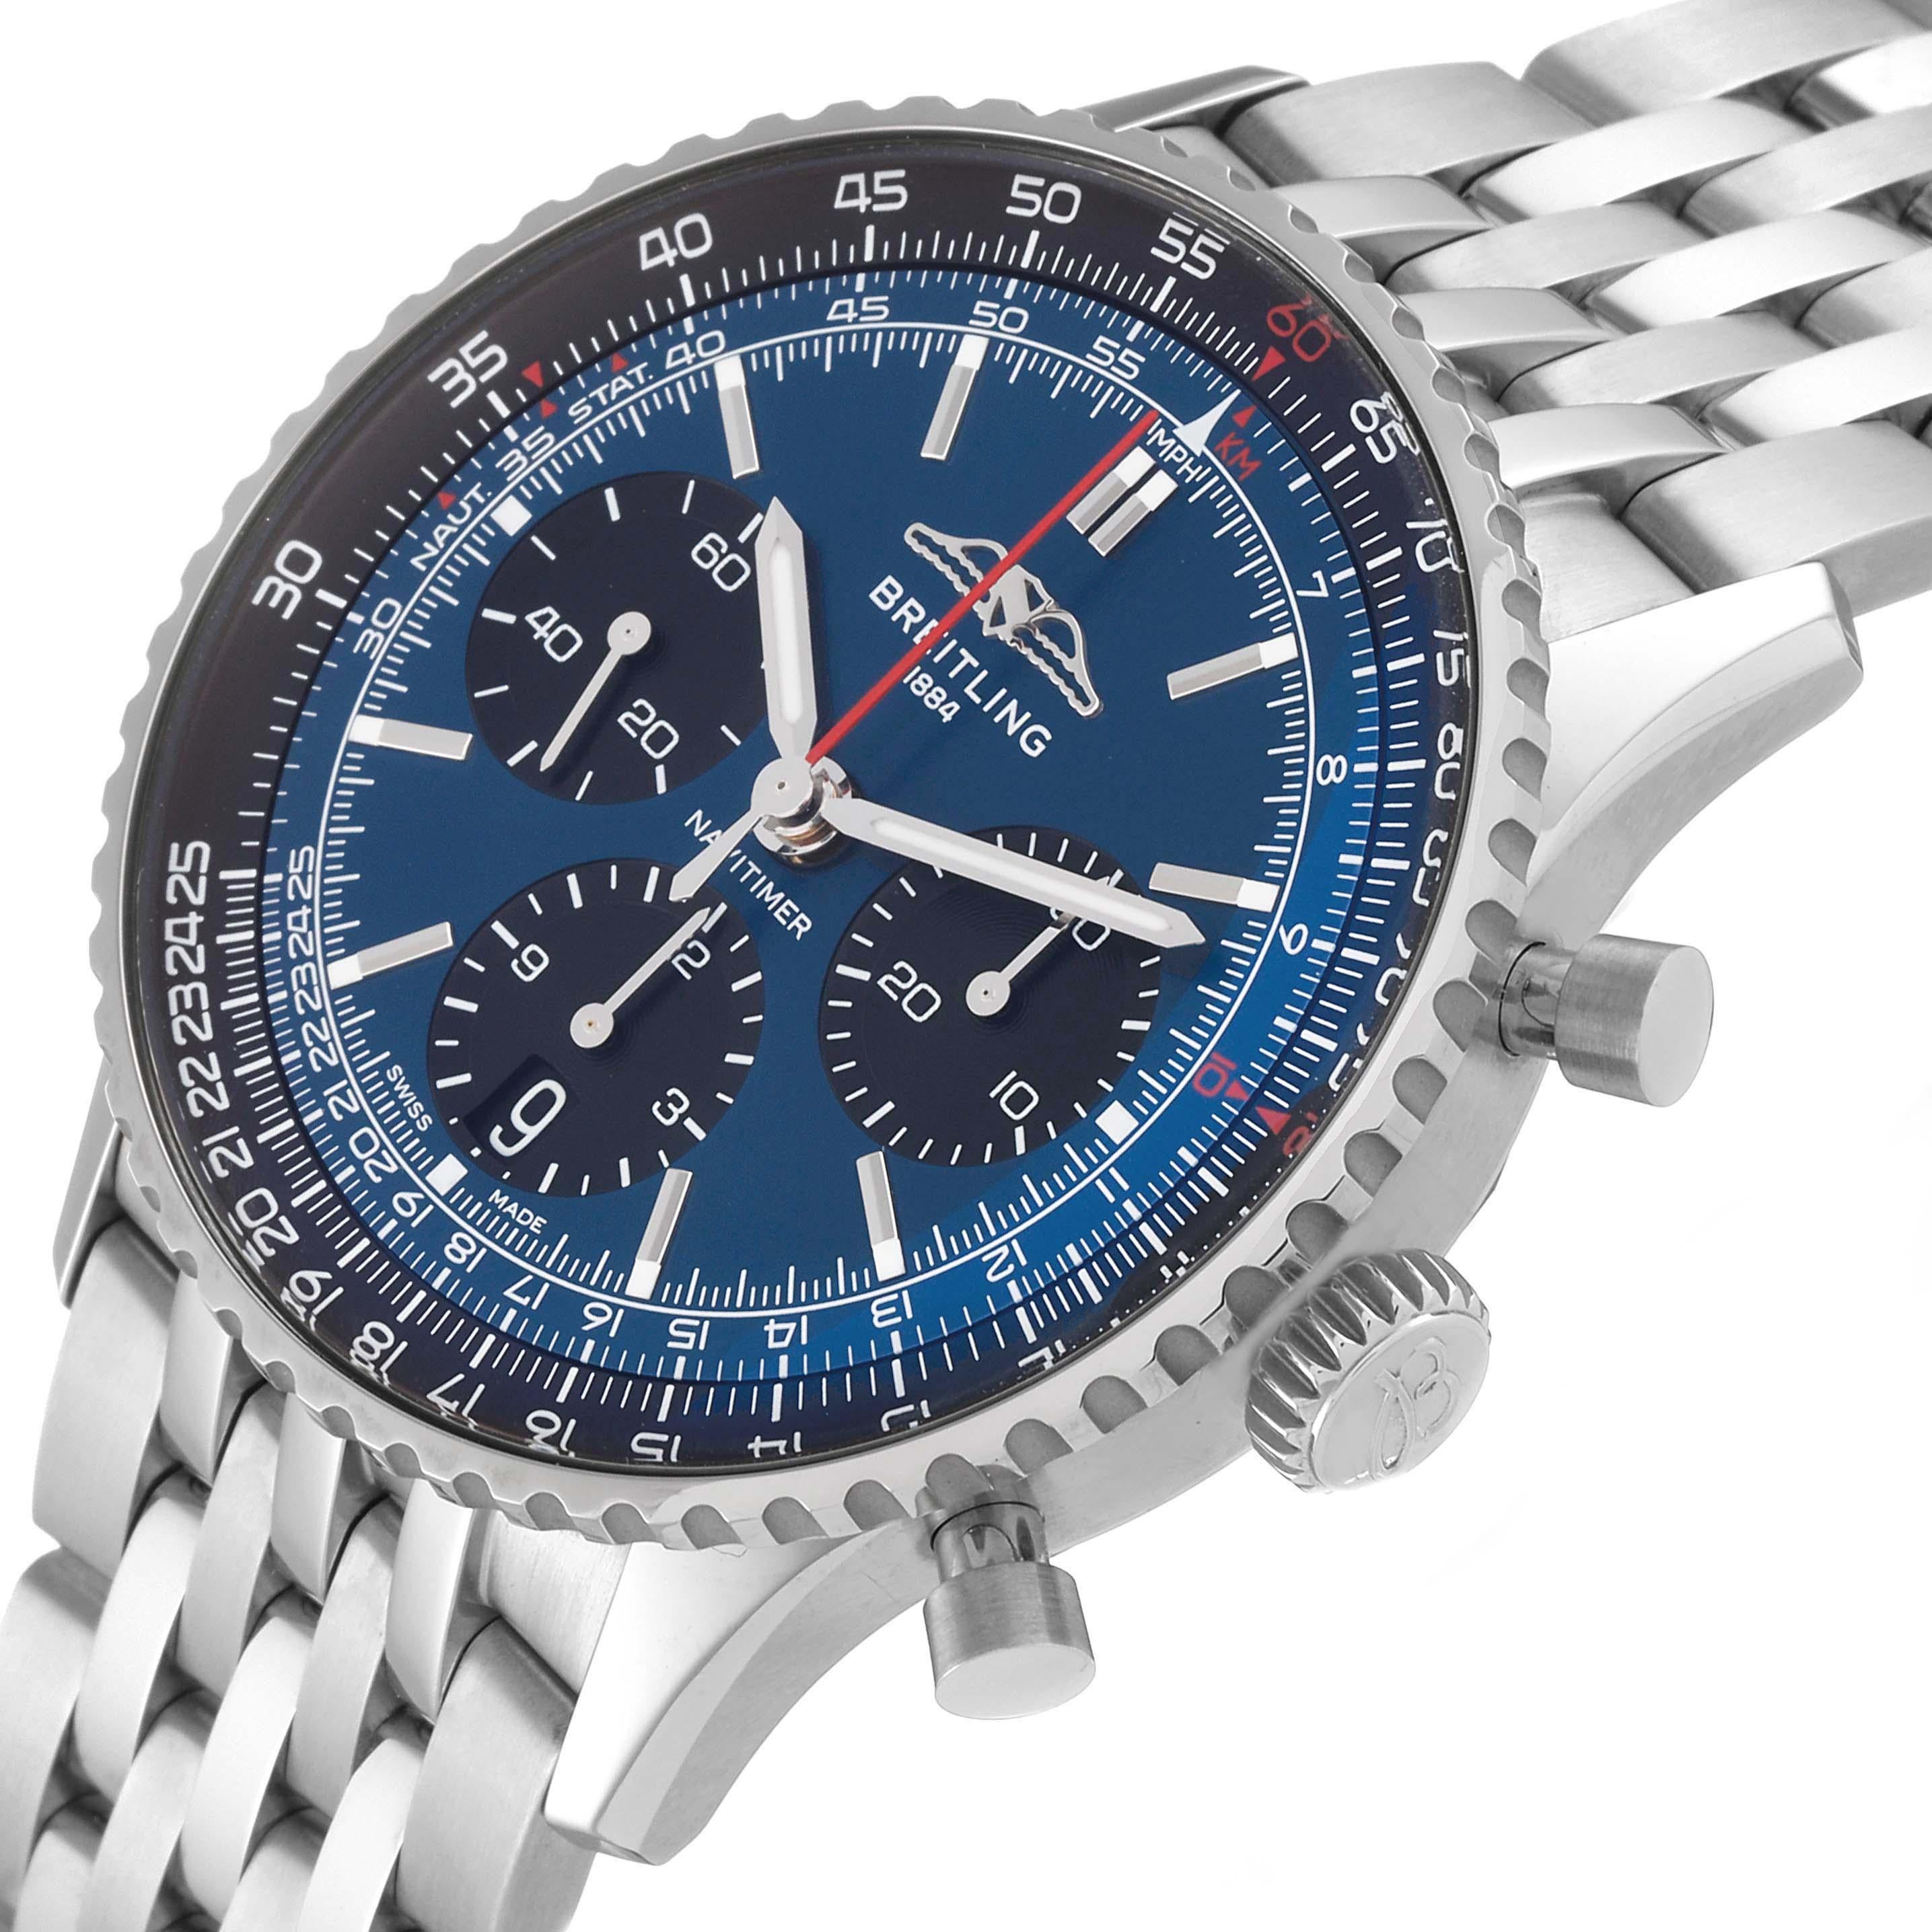 Breitling Navitimer B01 Chronograph 41 Blue Dial Steel Mens Watch AB0139 Unworn. Self-winding automatic officially certified chronometer movement. Chronograph function. Stainless steel case 41 mm in diameter. Case thickness 13.6 mm. Transparent